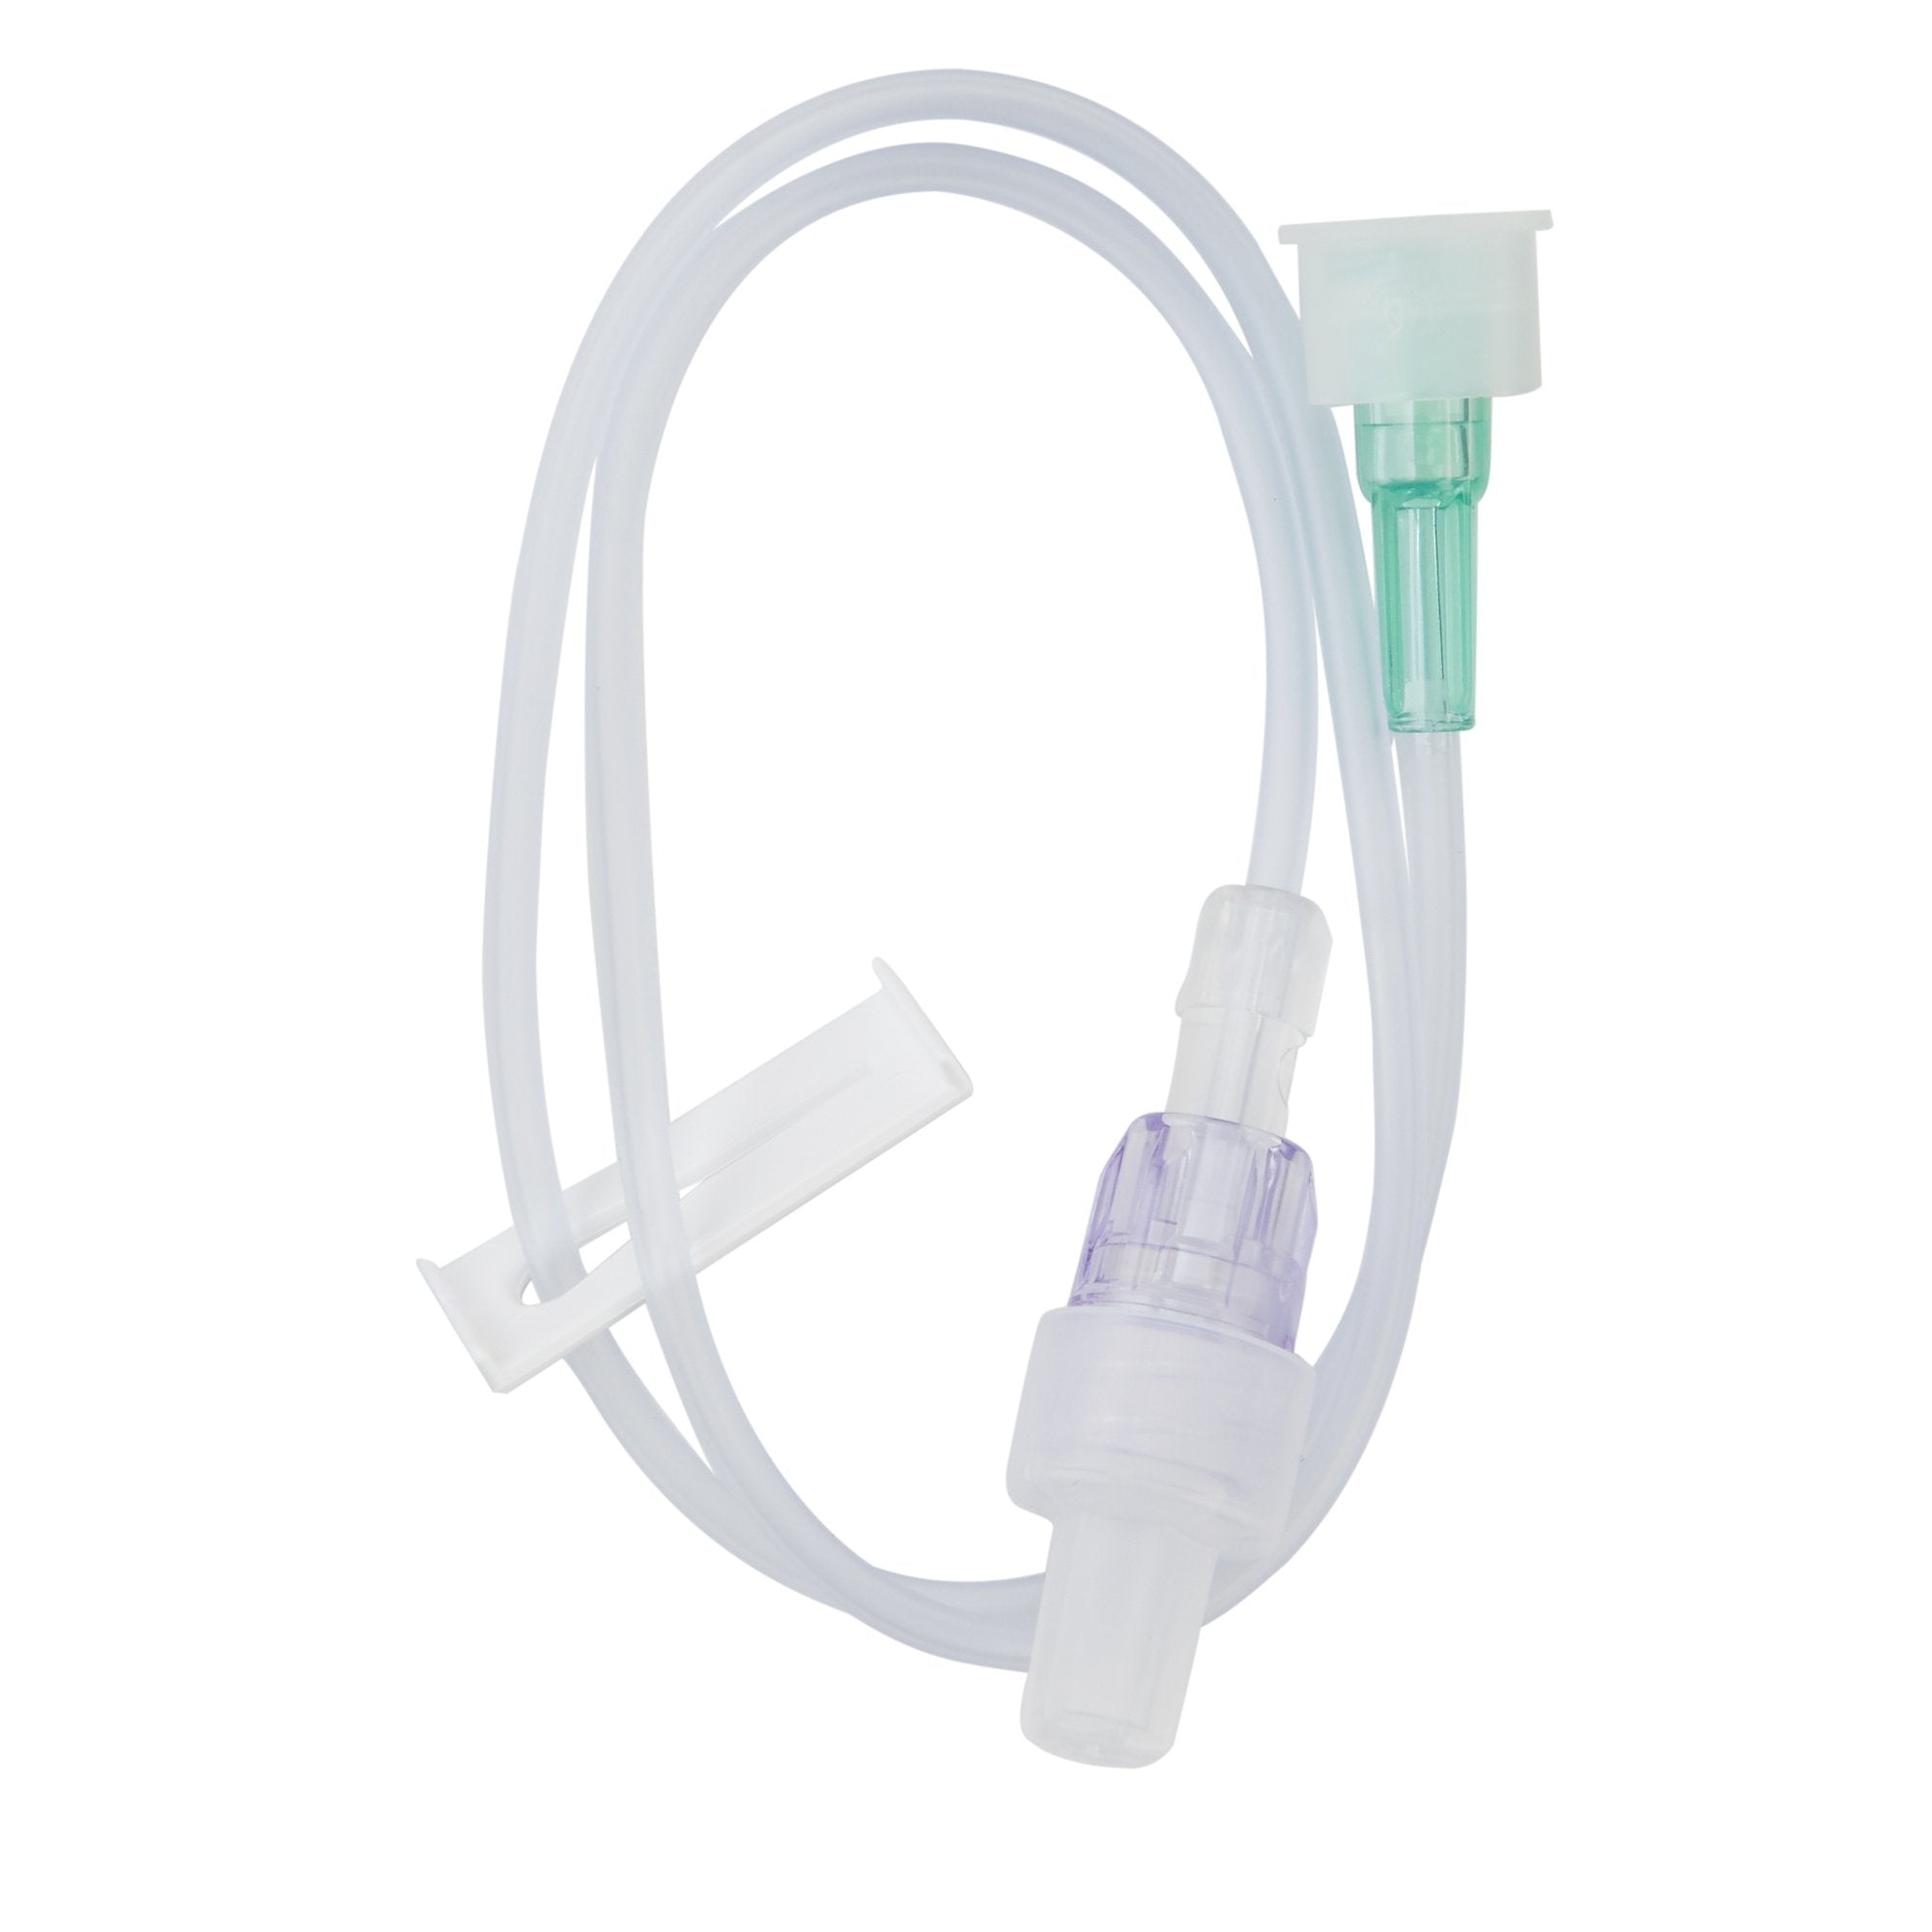 IV Extension Set Caresite Small Bore 17 Inch Tubing